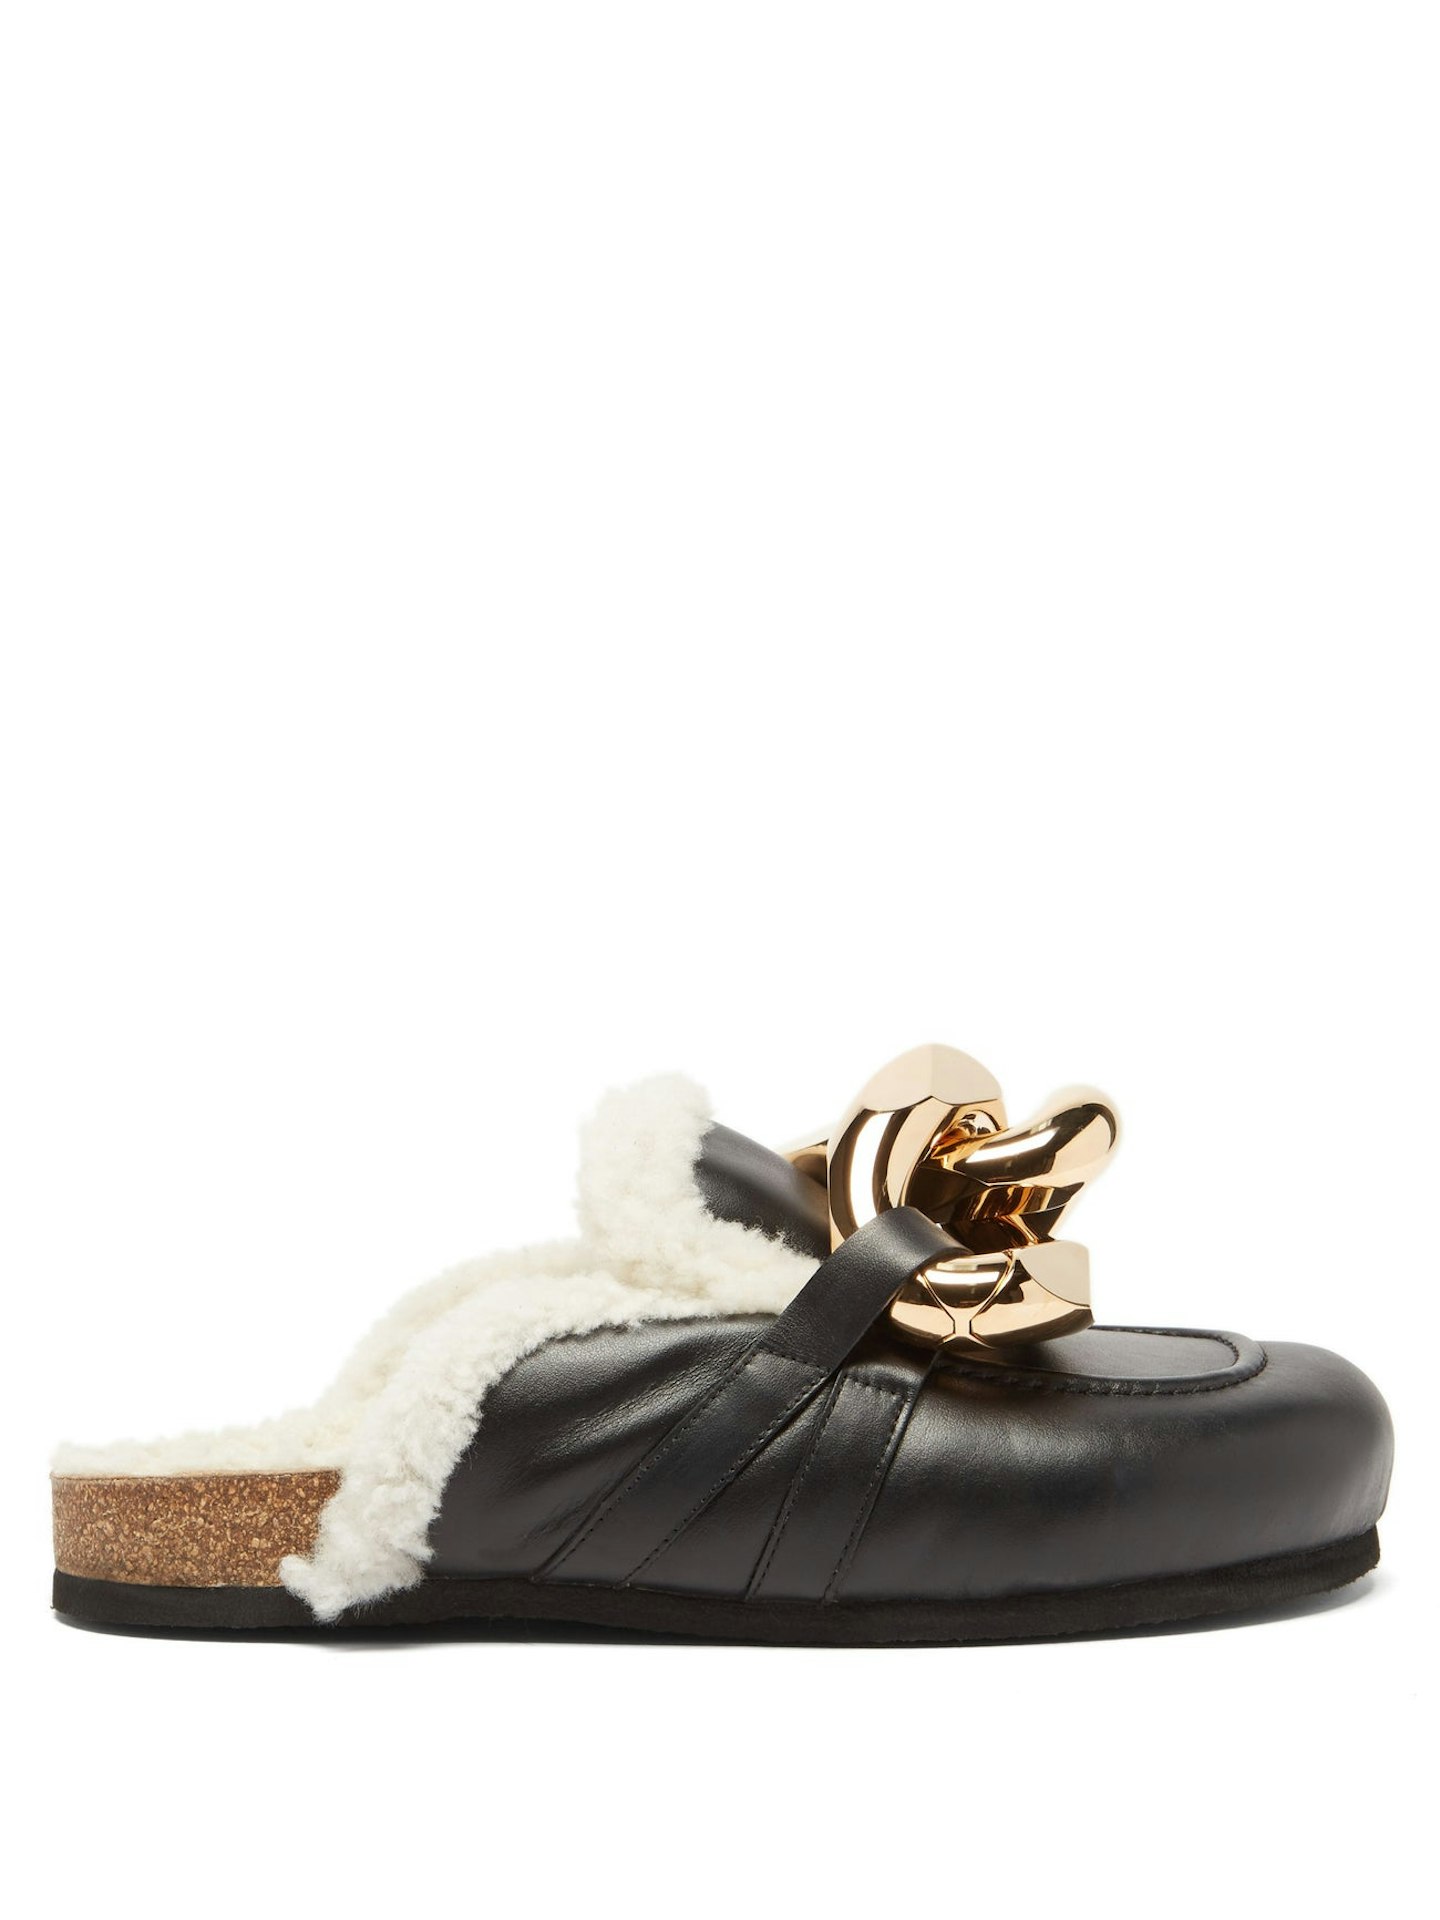 JW Anderson, Chain shearling-lined leather slides, WAS £570 NOW £427.50